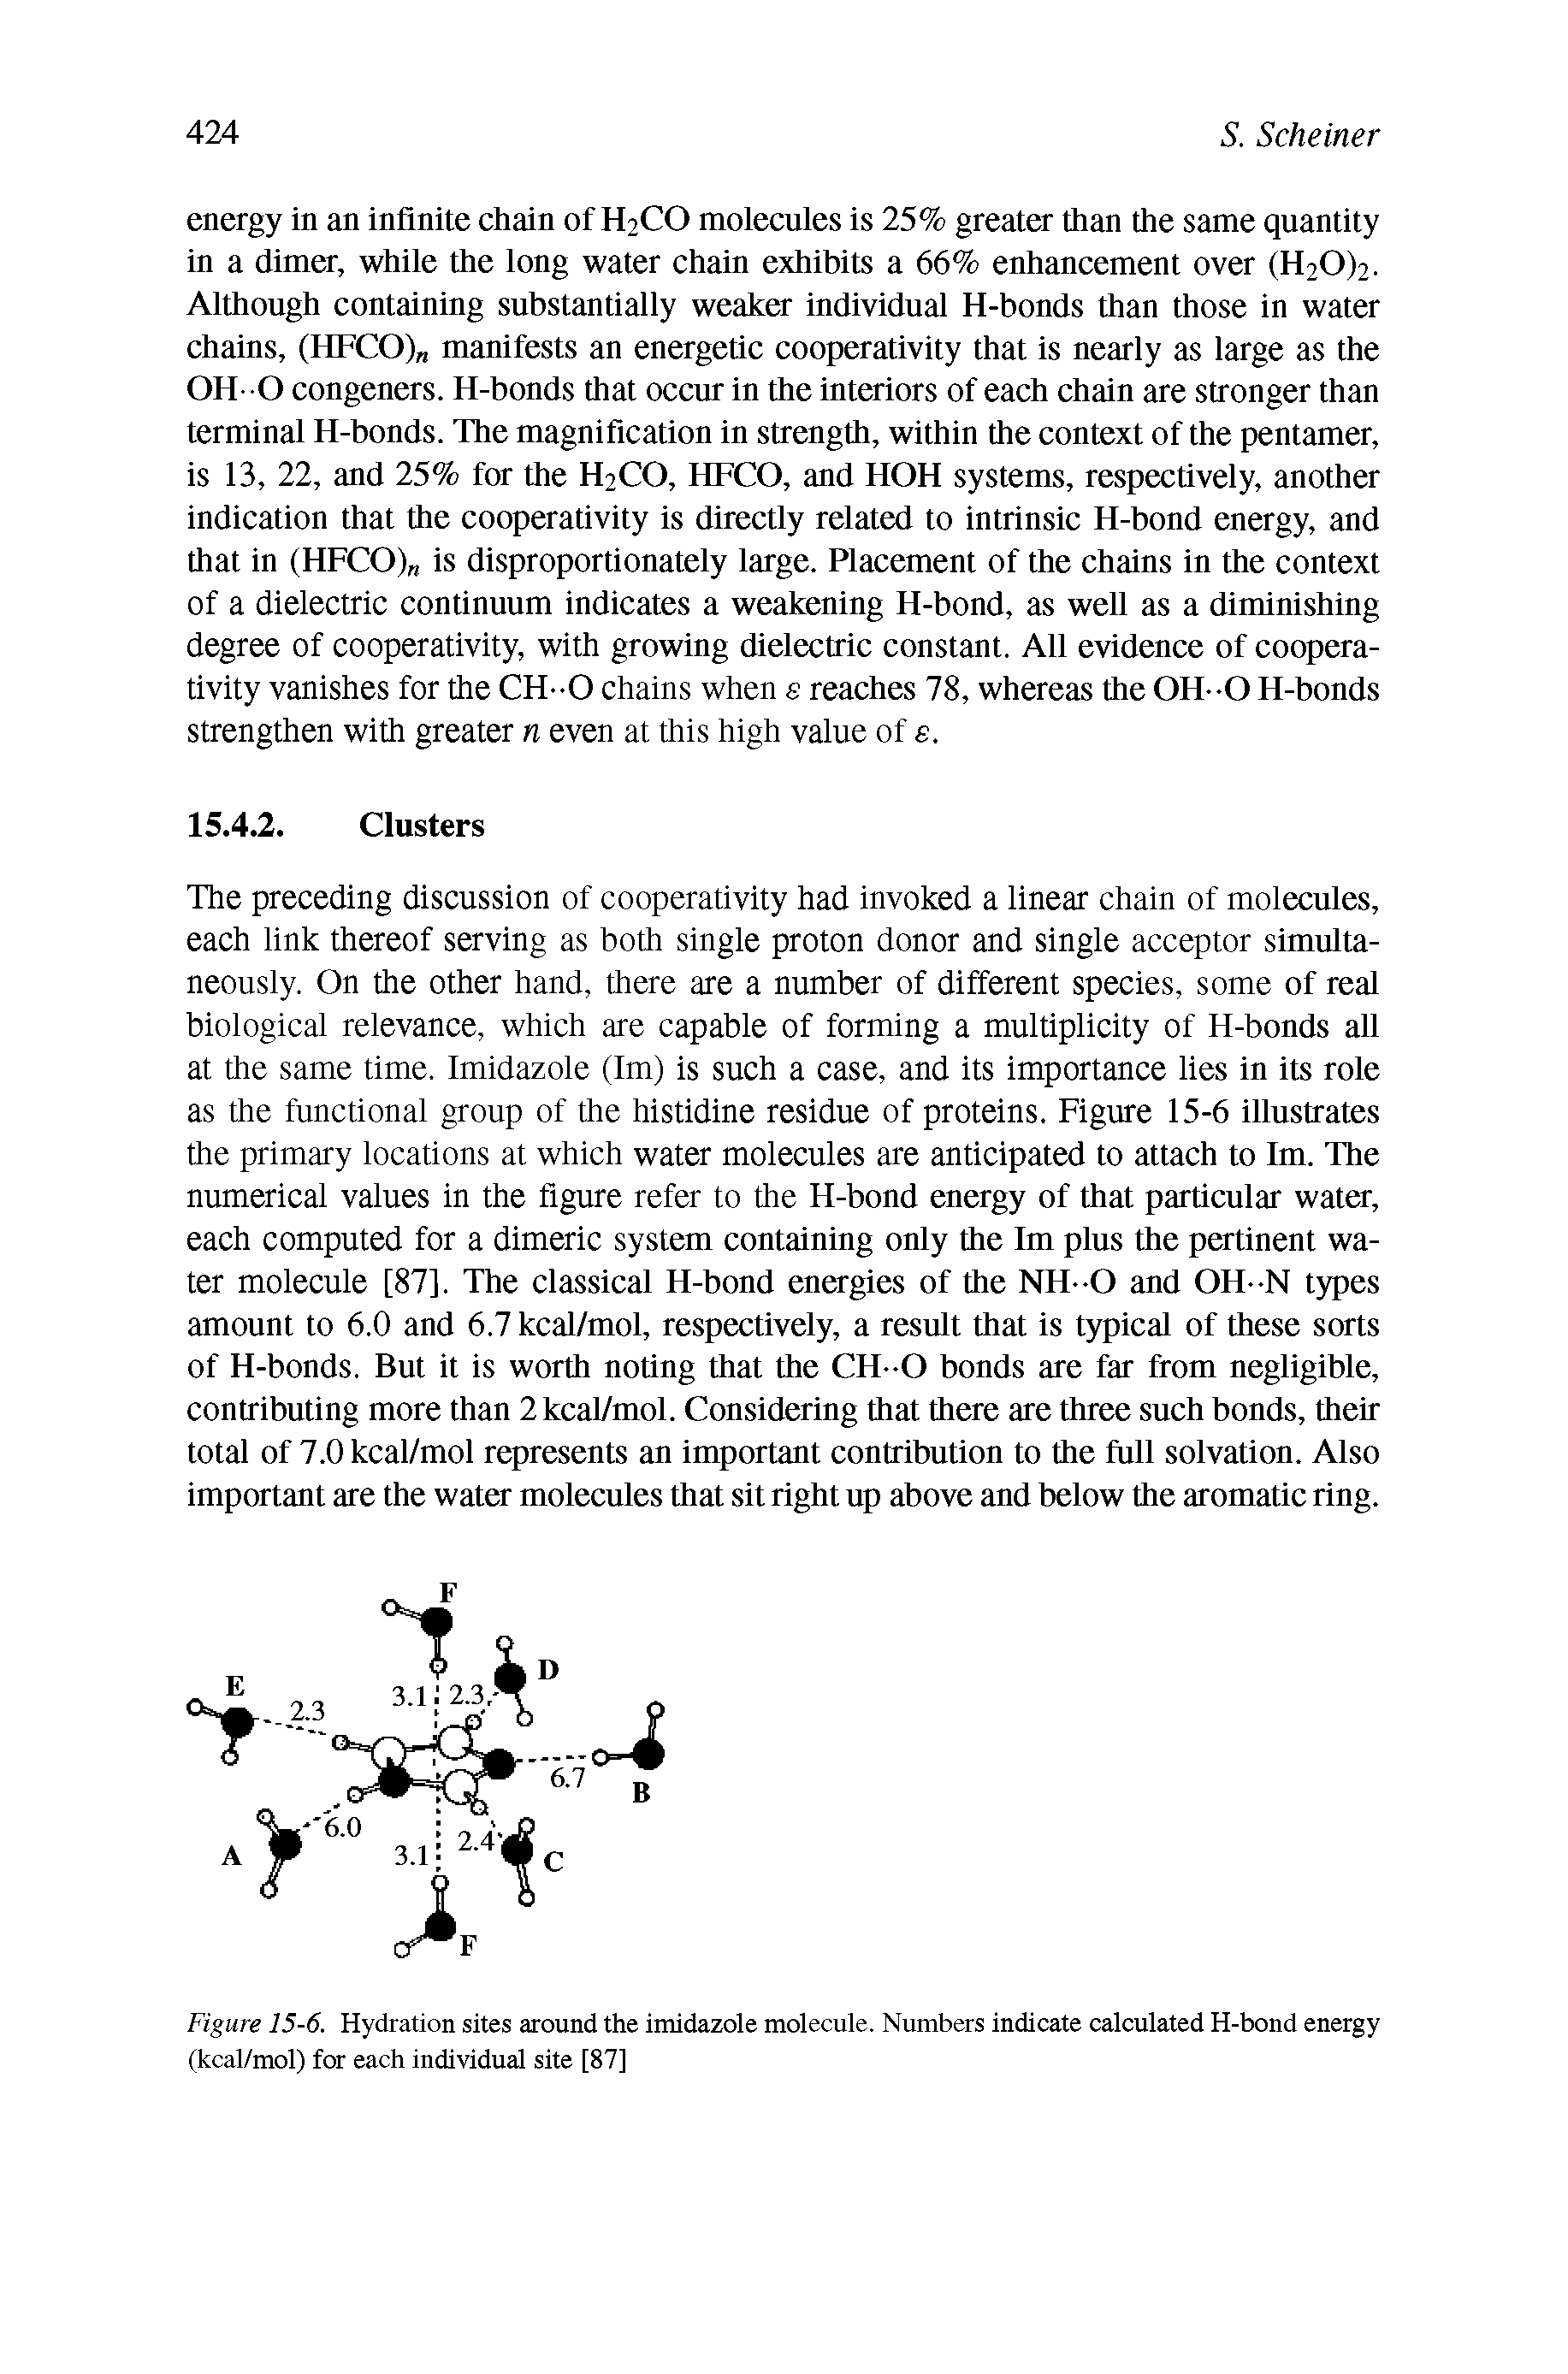 Figure 15-6. Hydration sites around the imidazole molecule. Numbers indicate calculated H-bond energy (kcal/mol) for each individual site [87]...